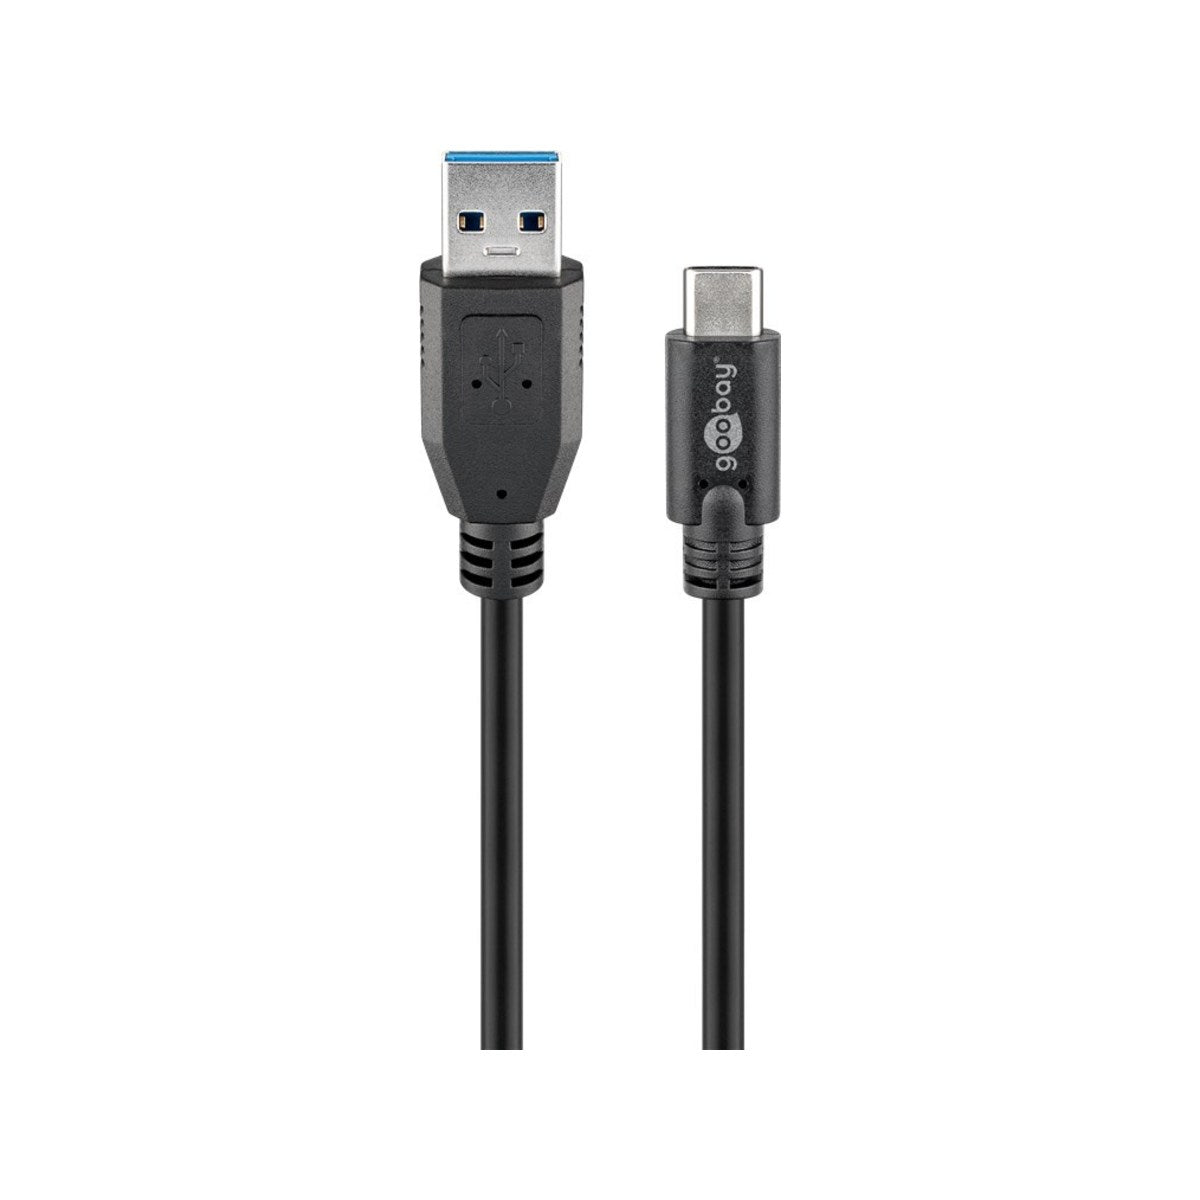 Goobay USB-C to USB-A 3.0 cable - 2.0m.